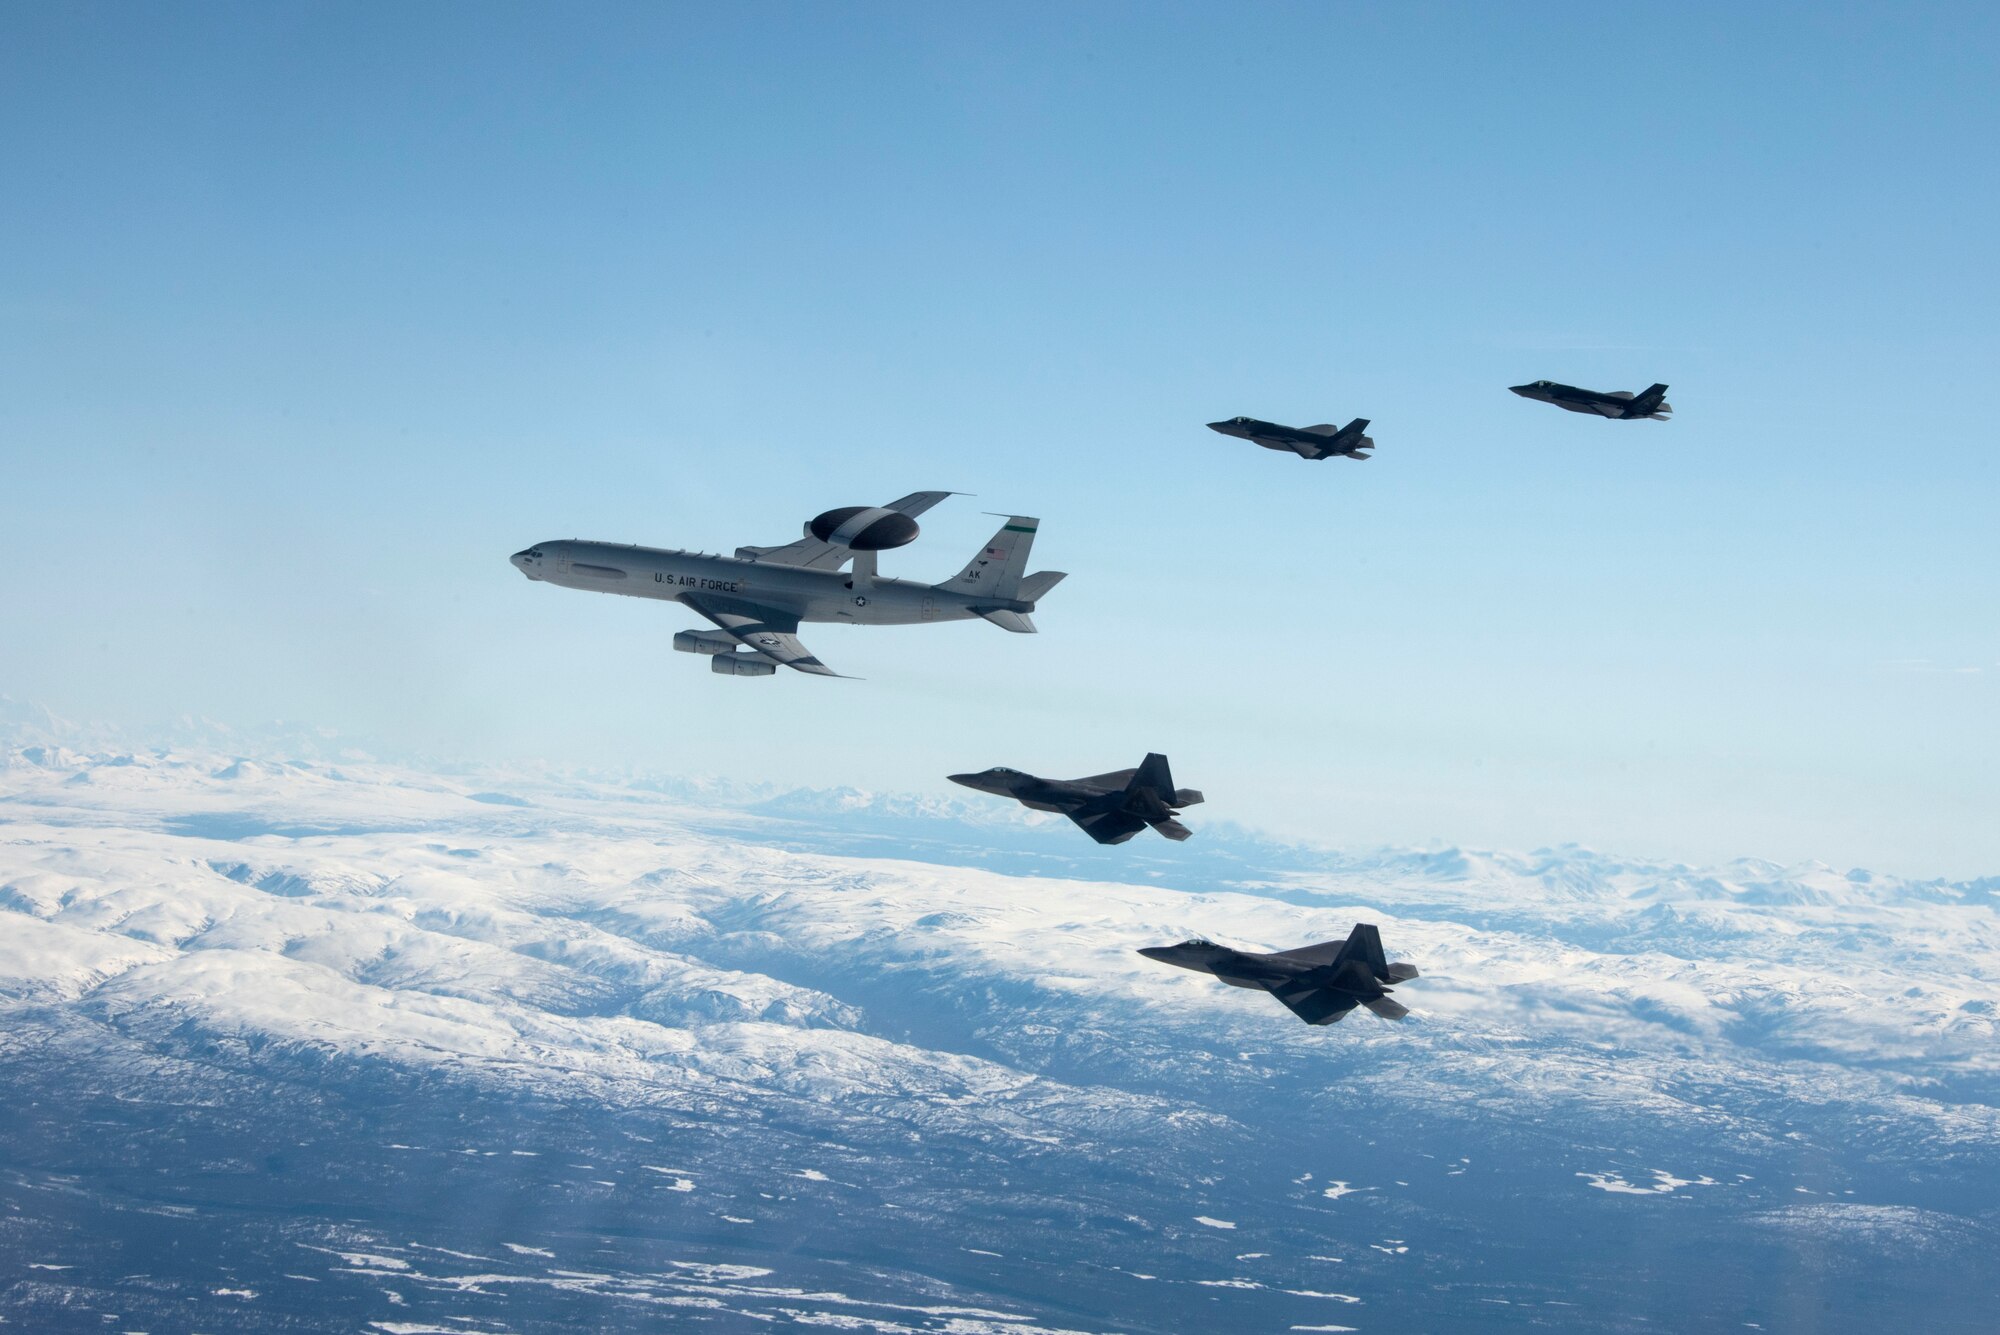 An E-3 Sentry, two F-22 Raptors and two F-35A Lightning IIs fly over Alaska May 5, 2020.